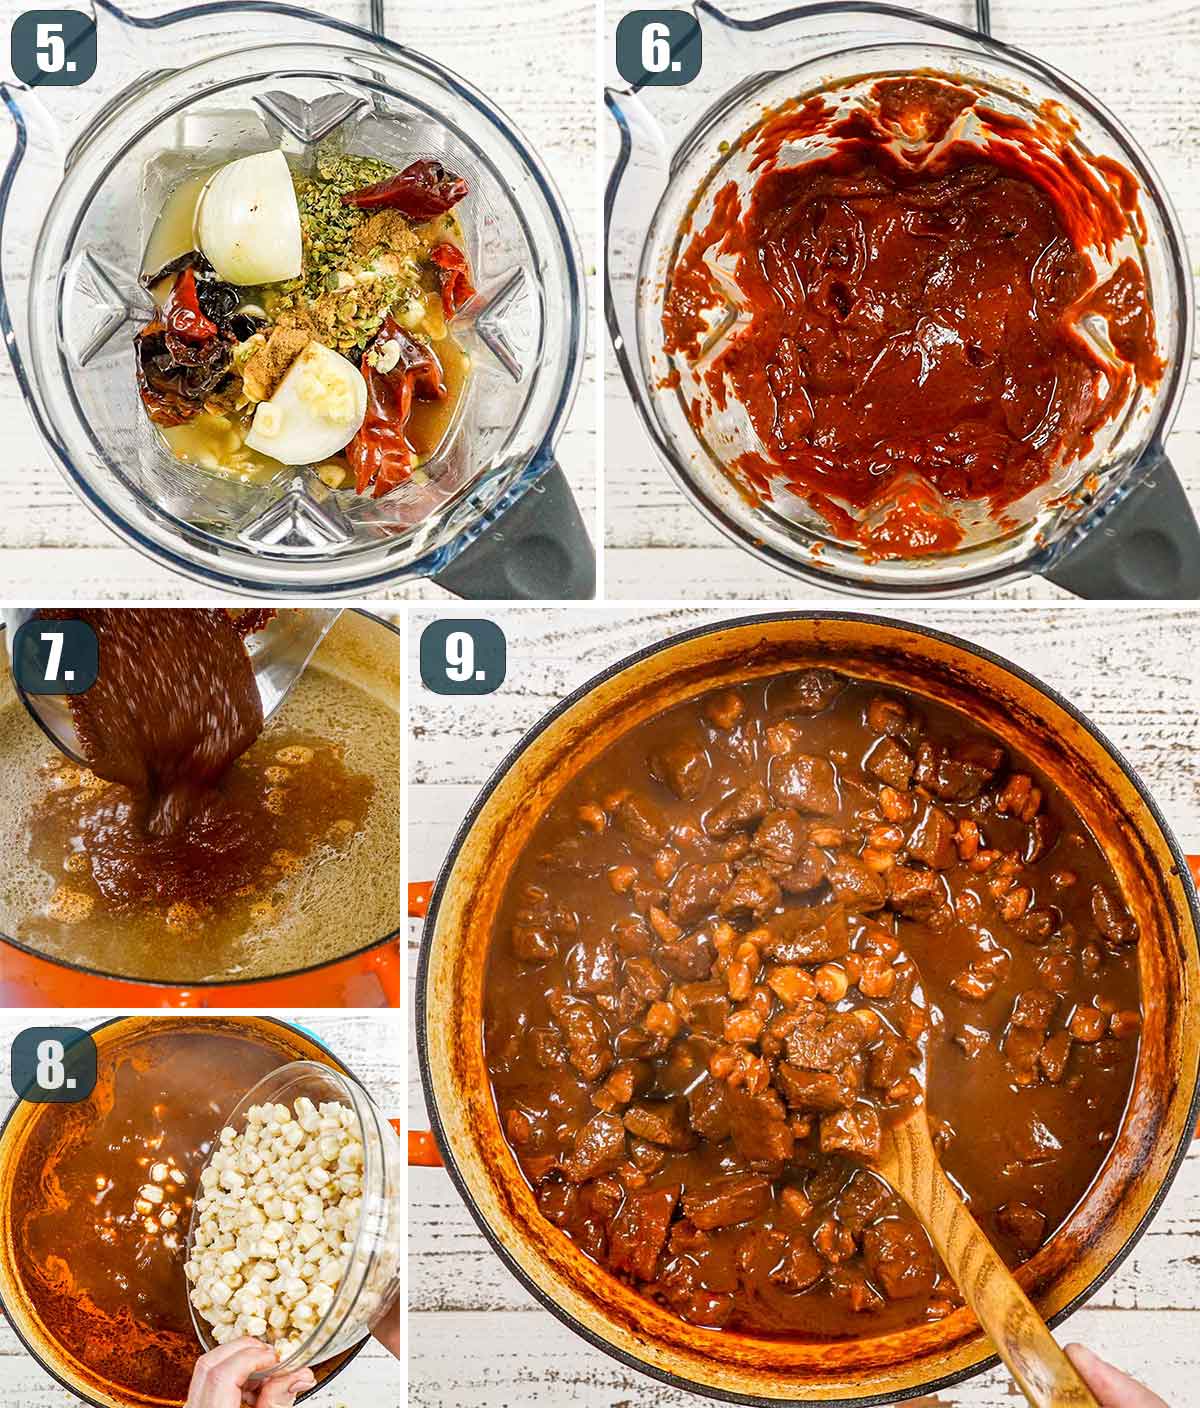 process shots showing how to make pozole rojo.